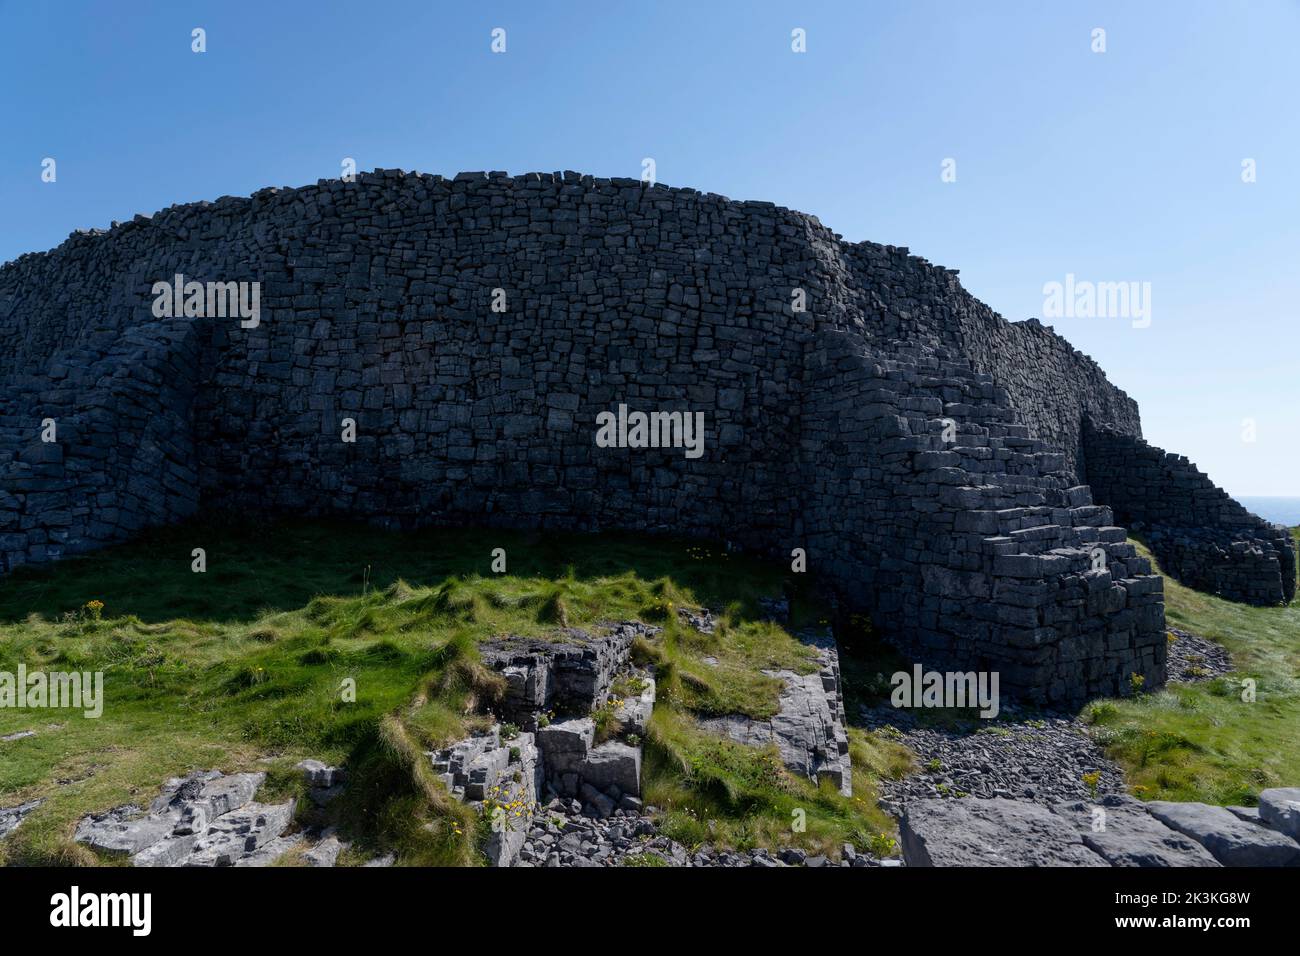 The ancient fortress of Dún Aonghasa or  Dún Aengus, Inishmore, the largest of the Aran Islands, Galway, Ireland Stock Photo